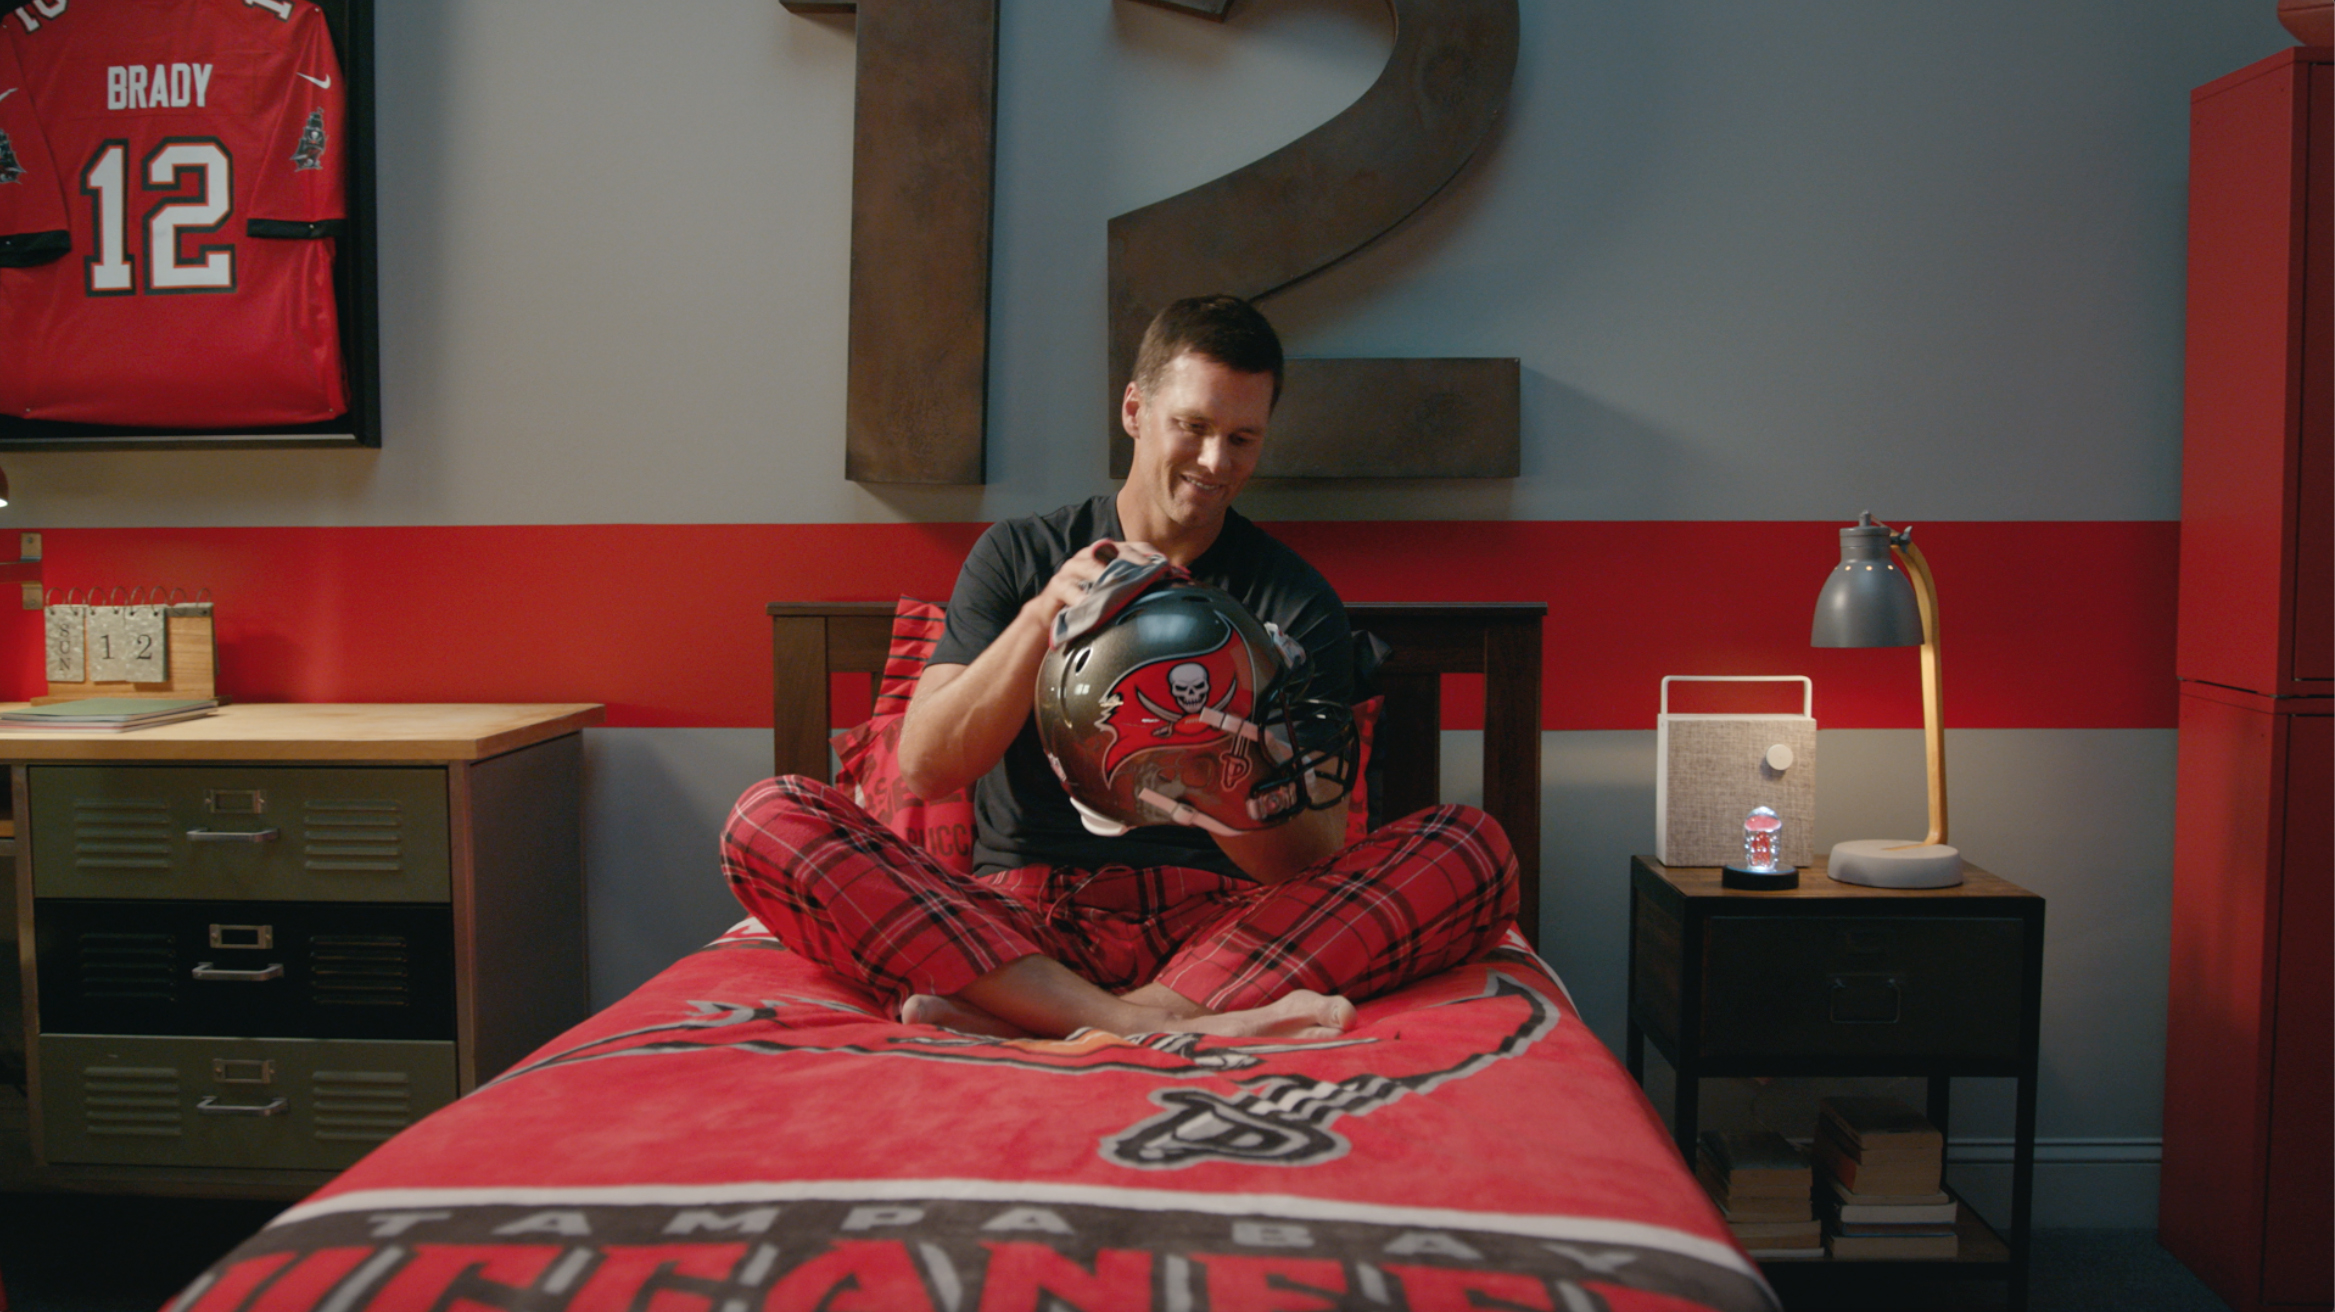 Frito-Lay’s new commercial features NFL pros and legends, including Tom Brady and Rob Gronkowski – both starring in their first commercial in a Tampa Bay uniform